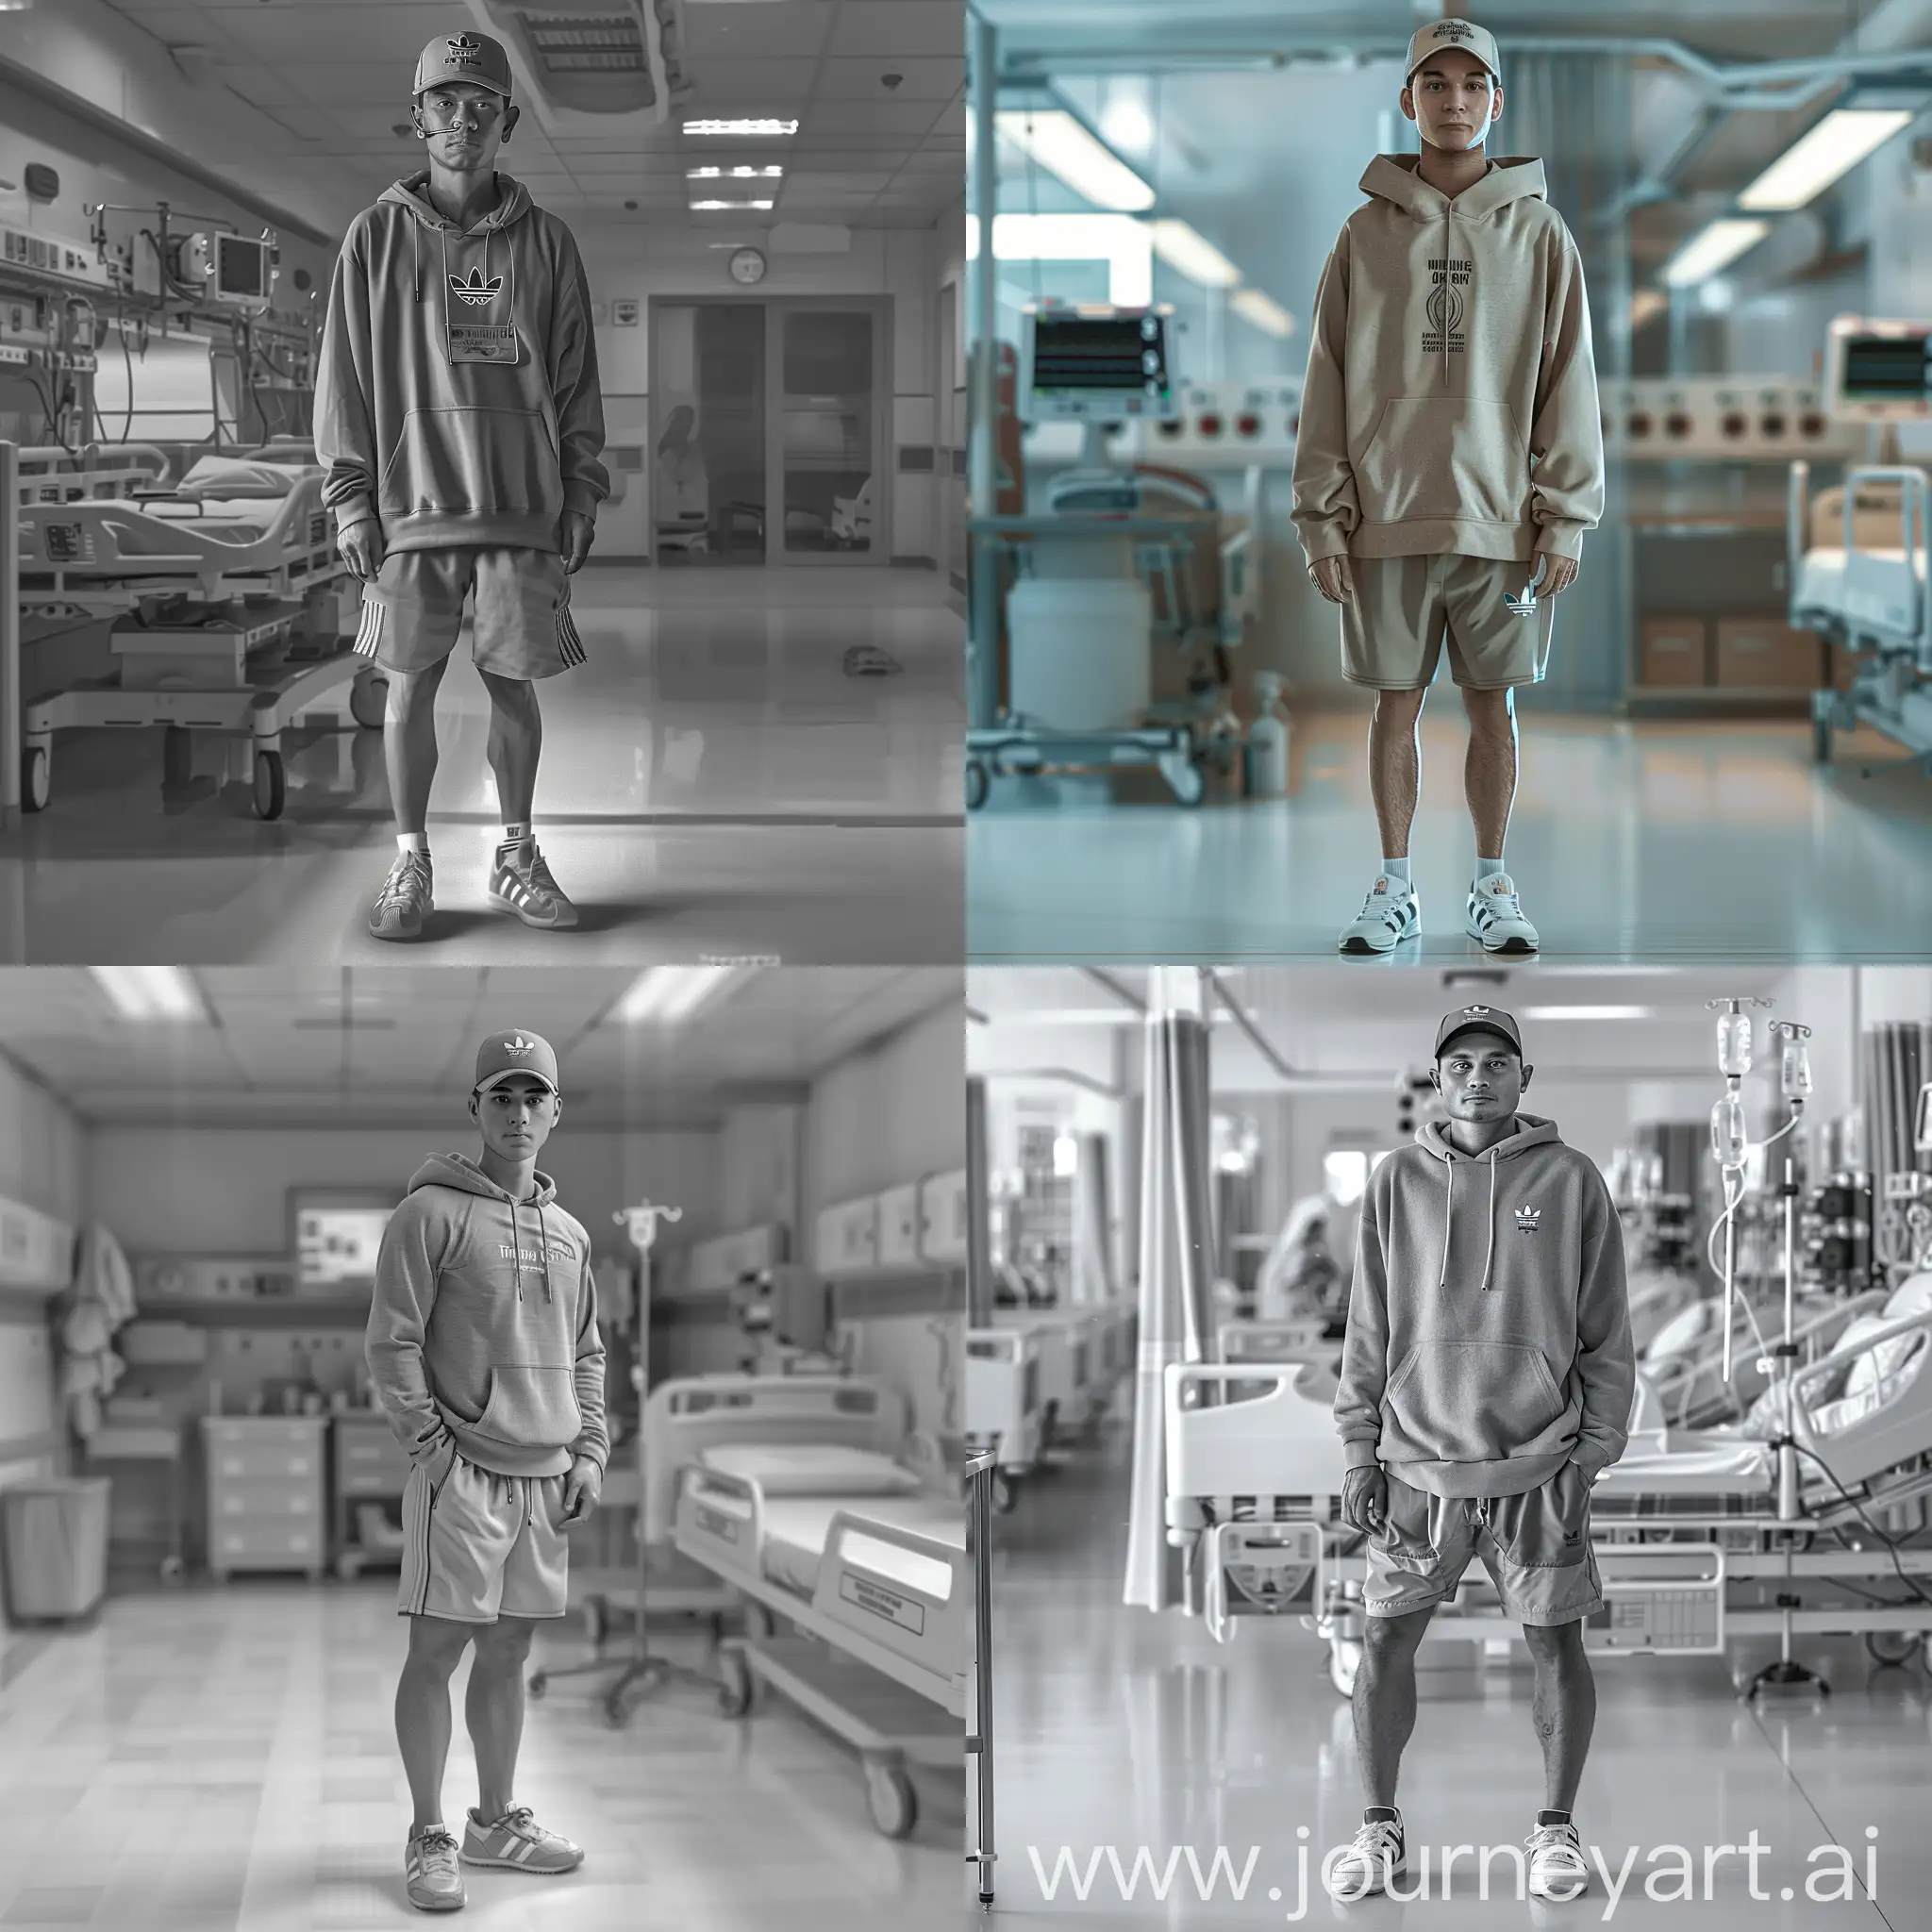 An Indonesian man, 35 years old, handsome with a clean face, wearing a baseball cap, hoodie, shorts, Adidas shoes, standing inside a hospital room, the background of the hospital ward is clearly visible, realistic HD. 